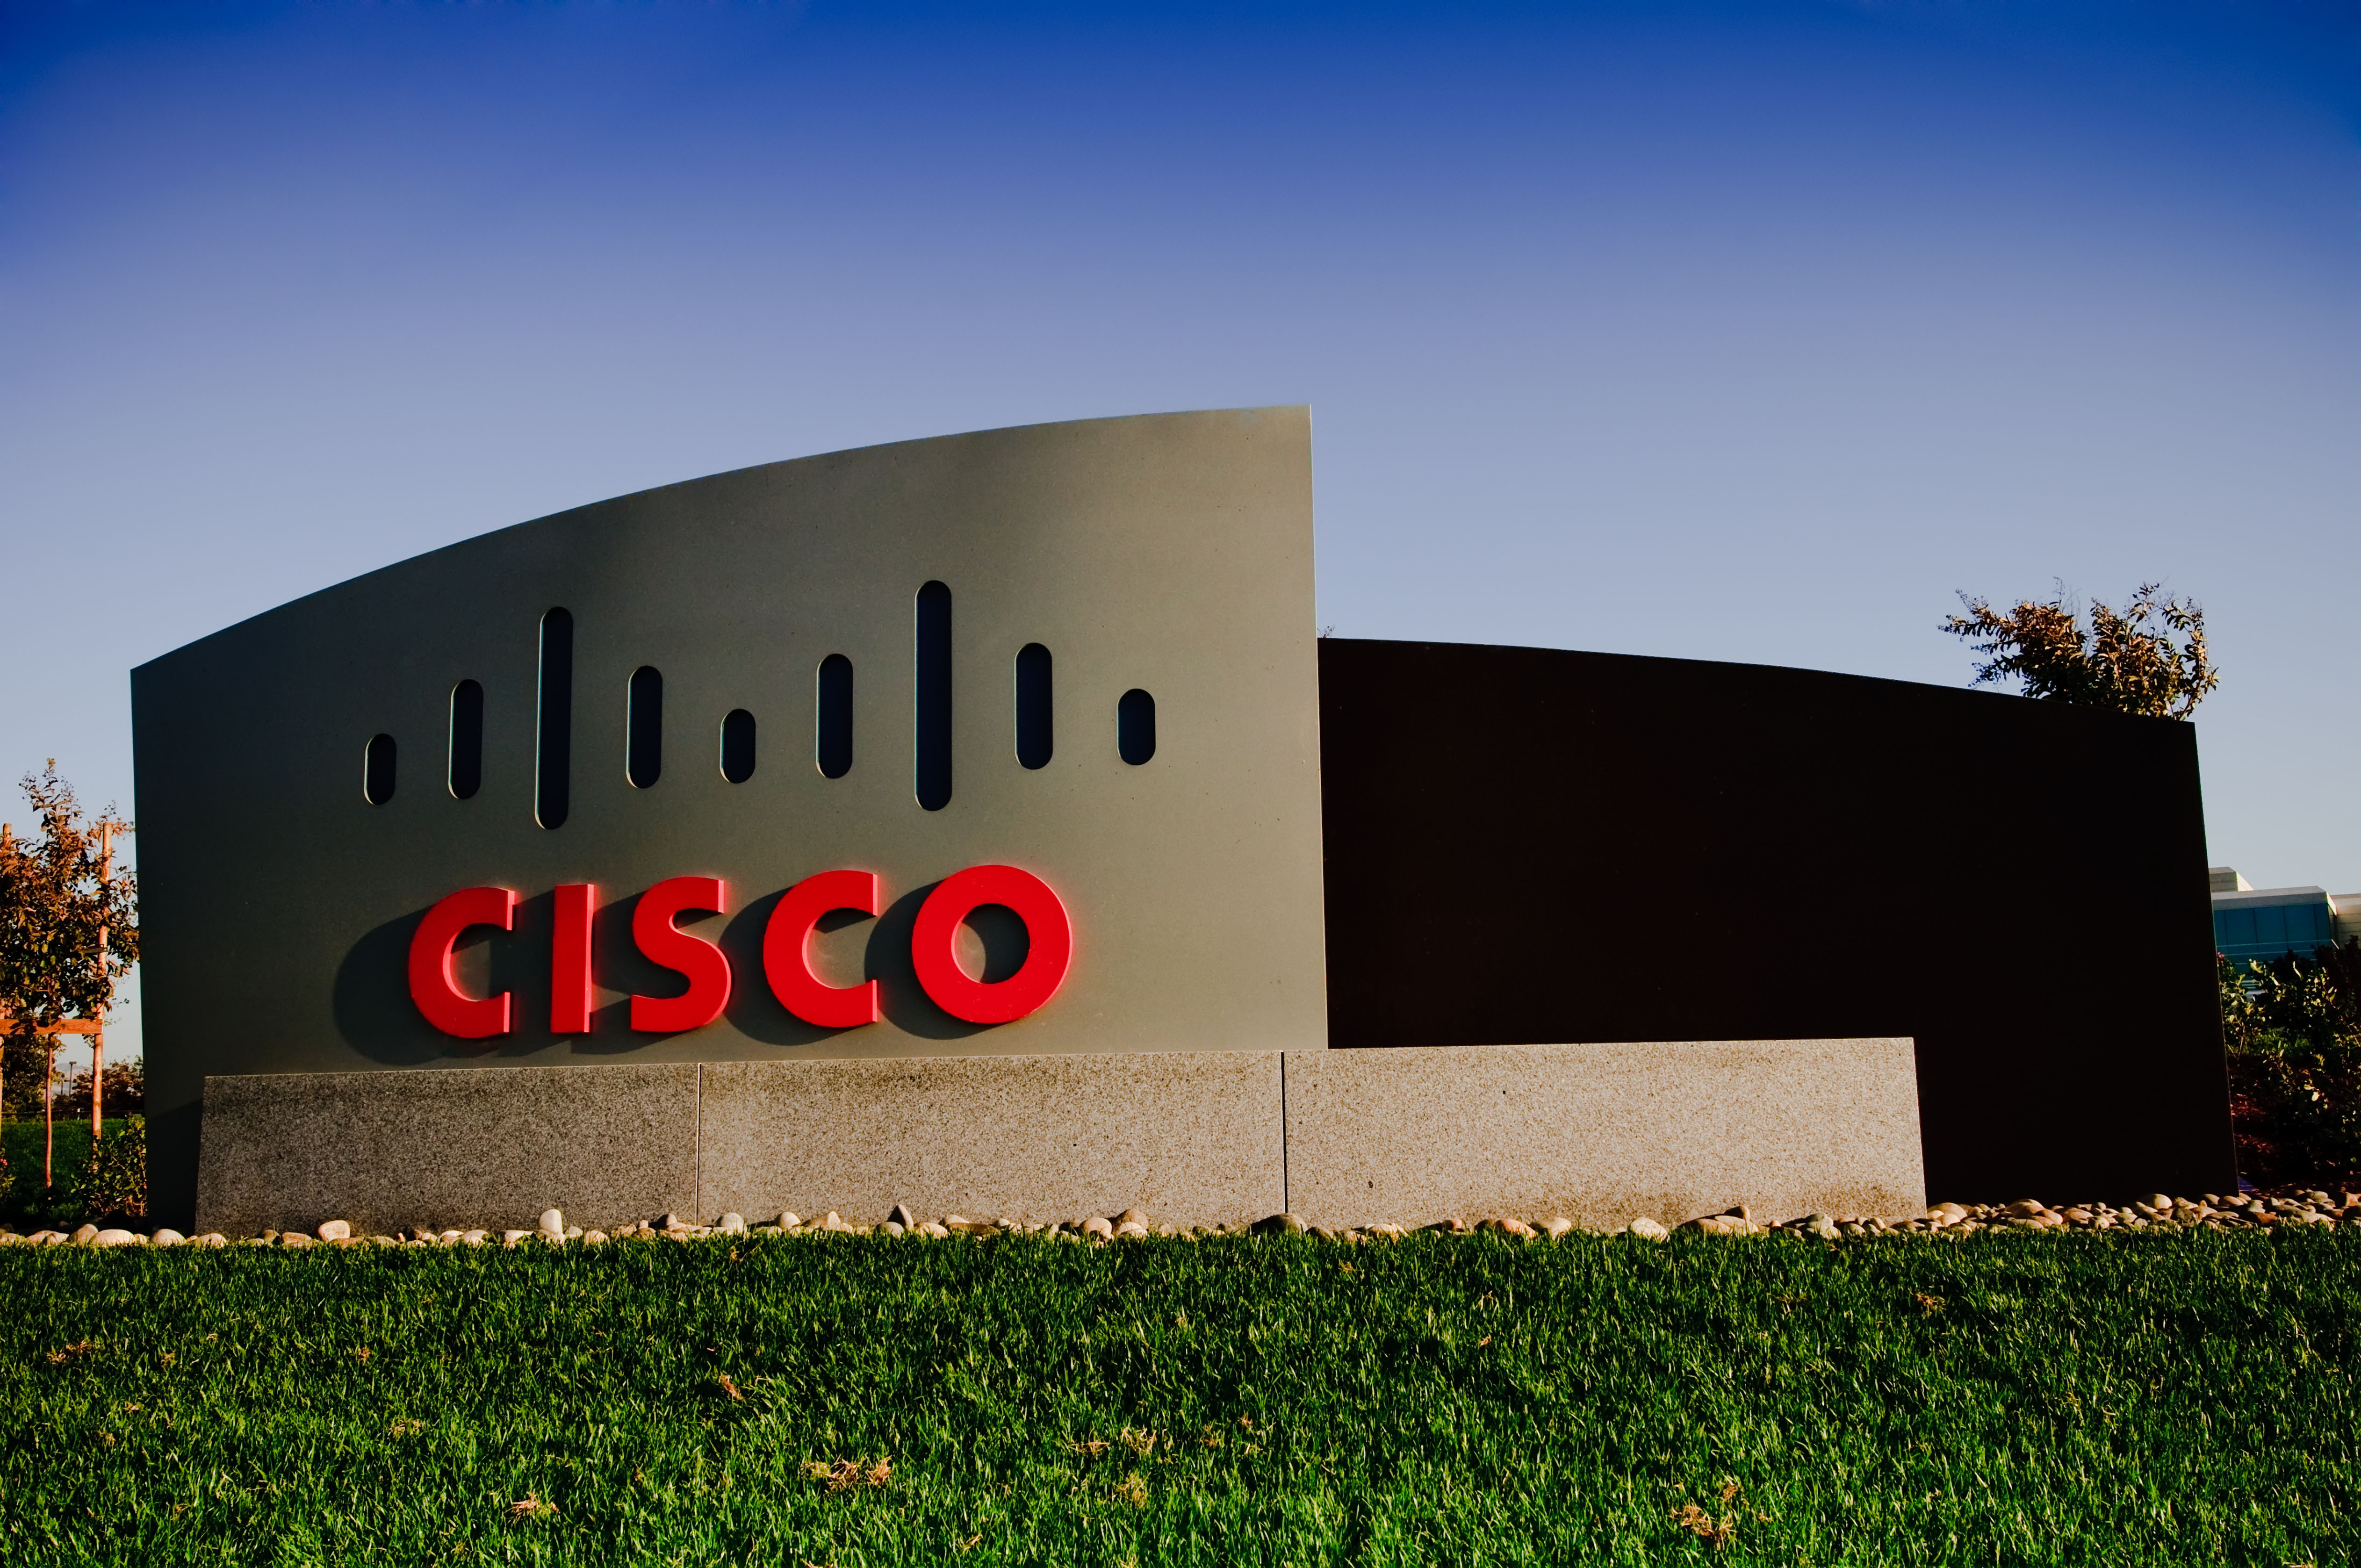 From Dark Reading – Cisco IOS Bugs Allow Unauthenticated, Remote DoS Attacks